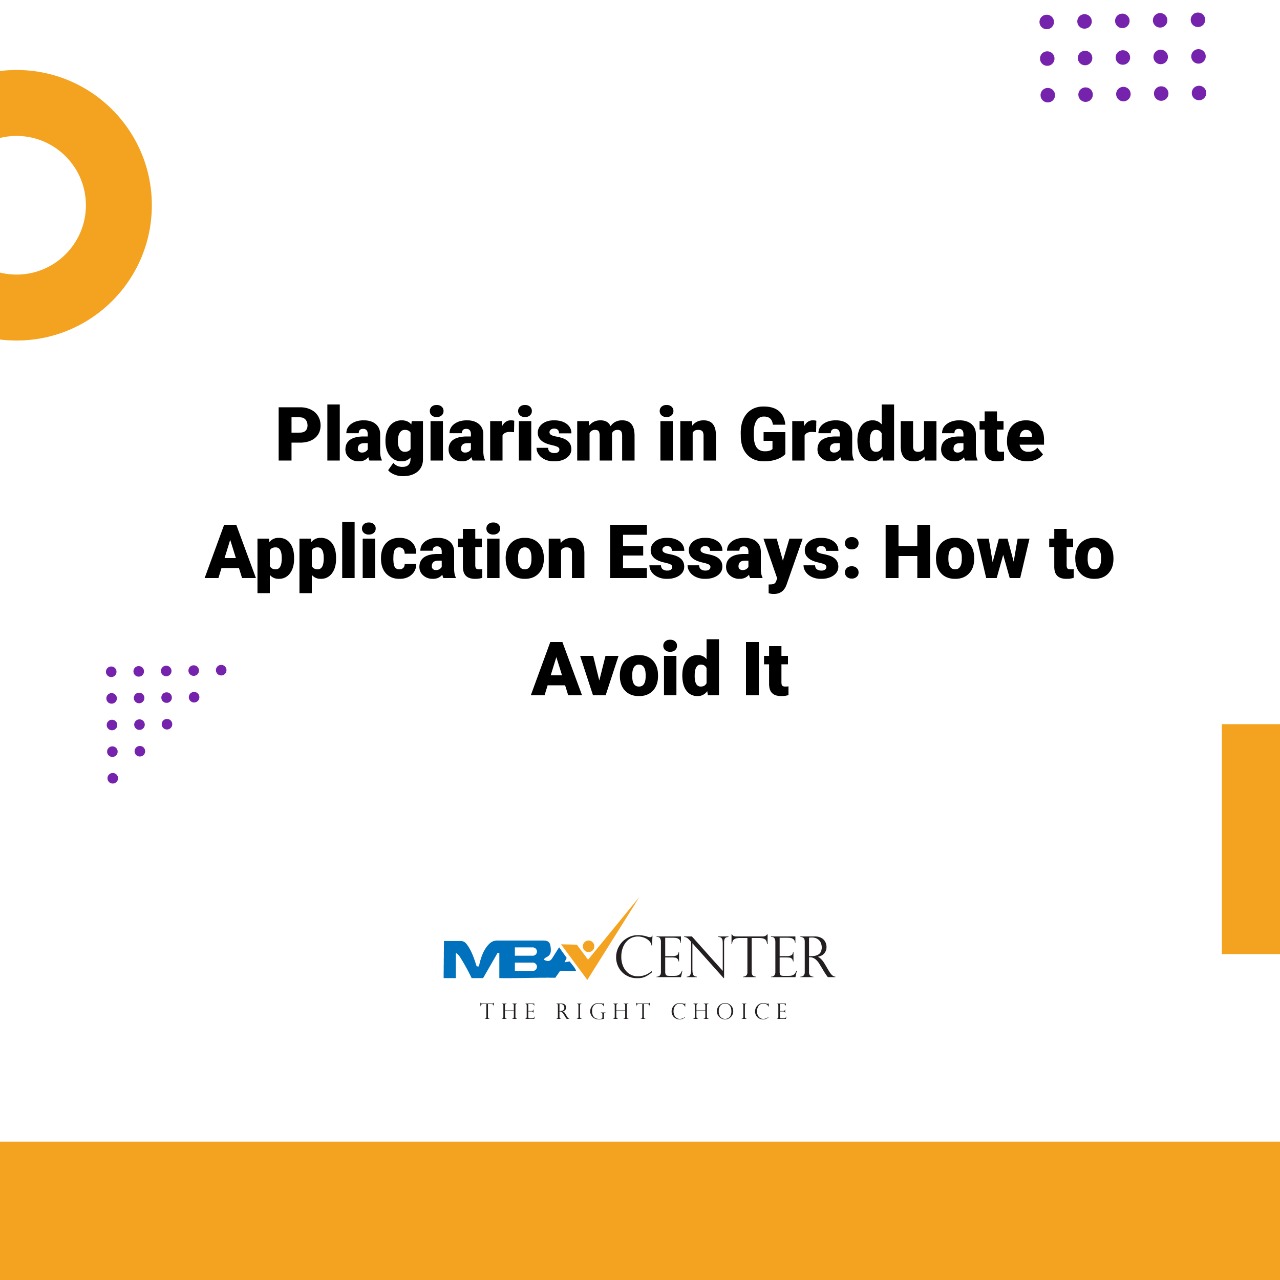 Plagiarism in Graduate Application Essays: How to Avoid It